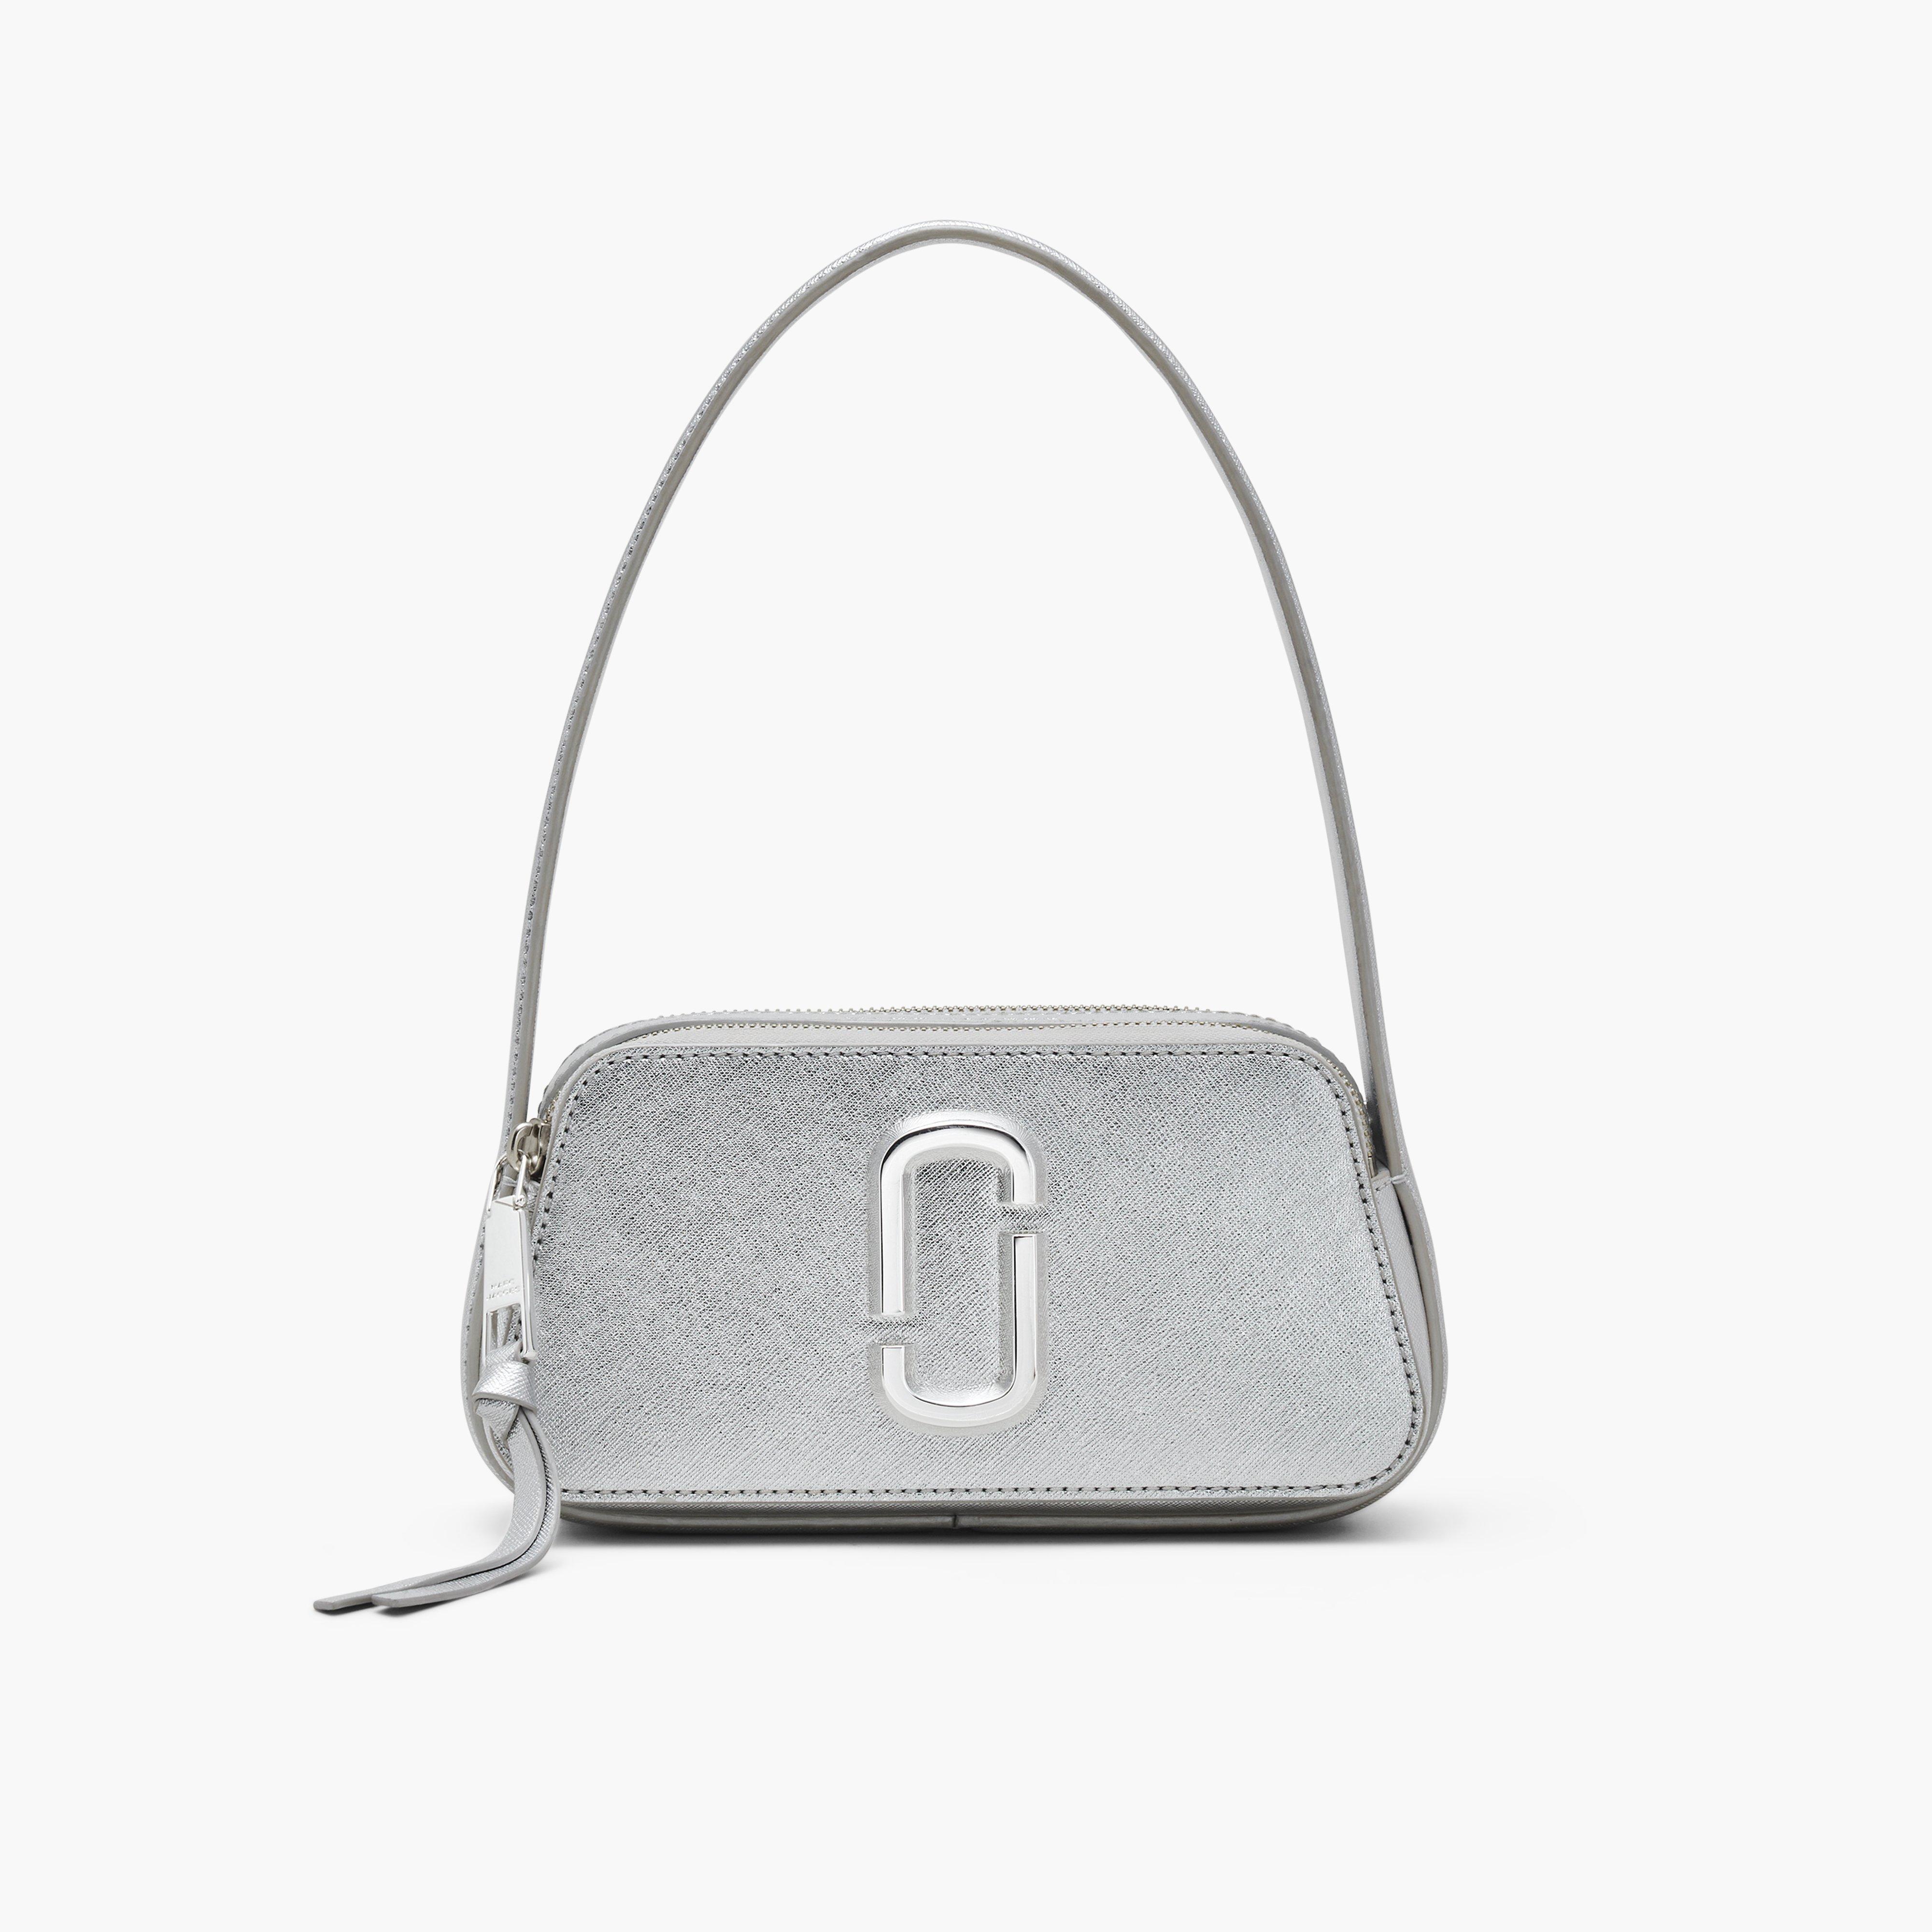 Marc by Marc jacobs The Metallic Slingshot,SILVER